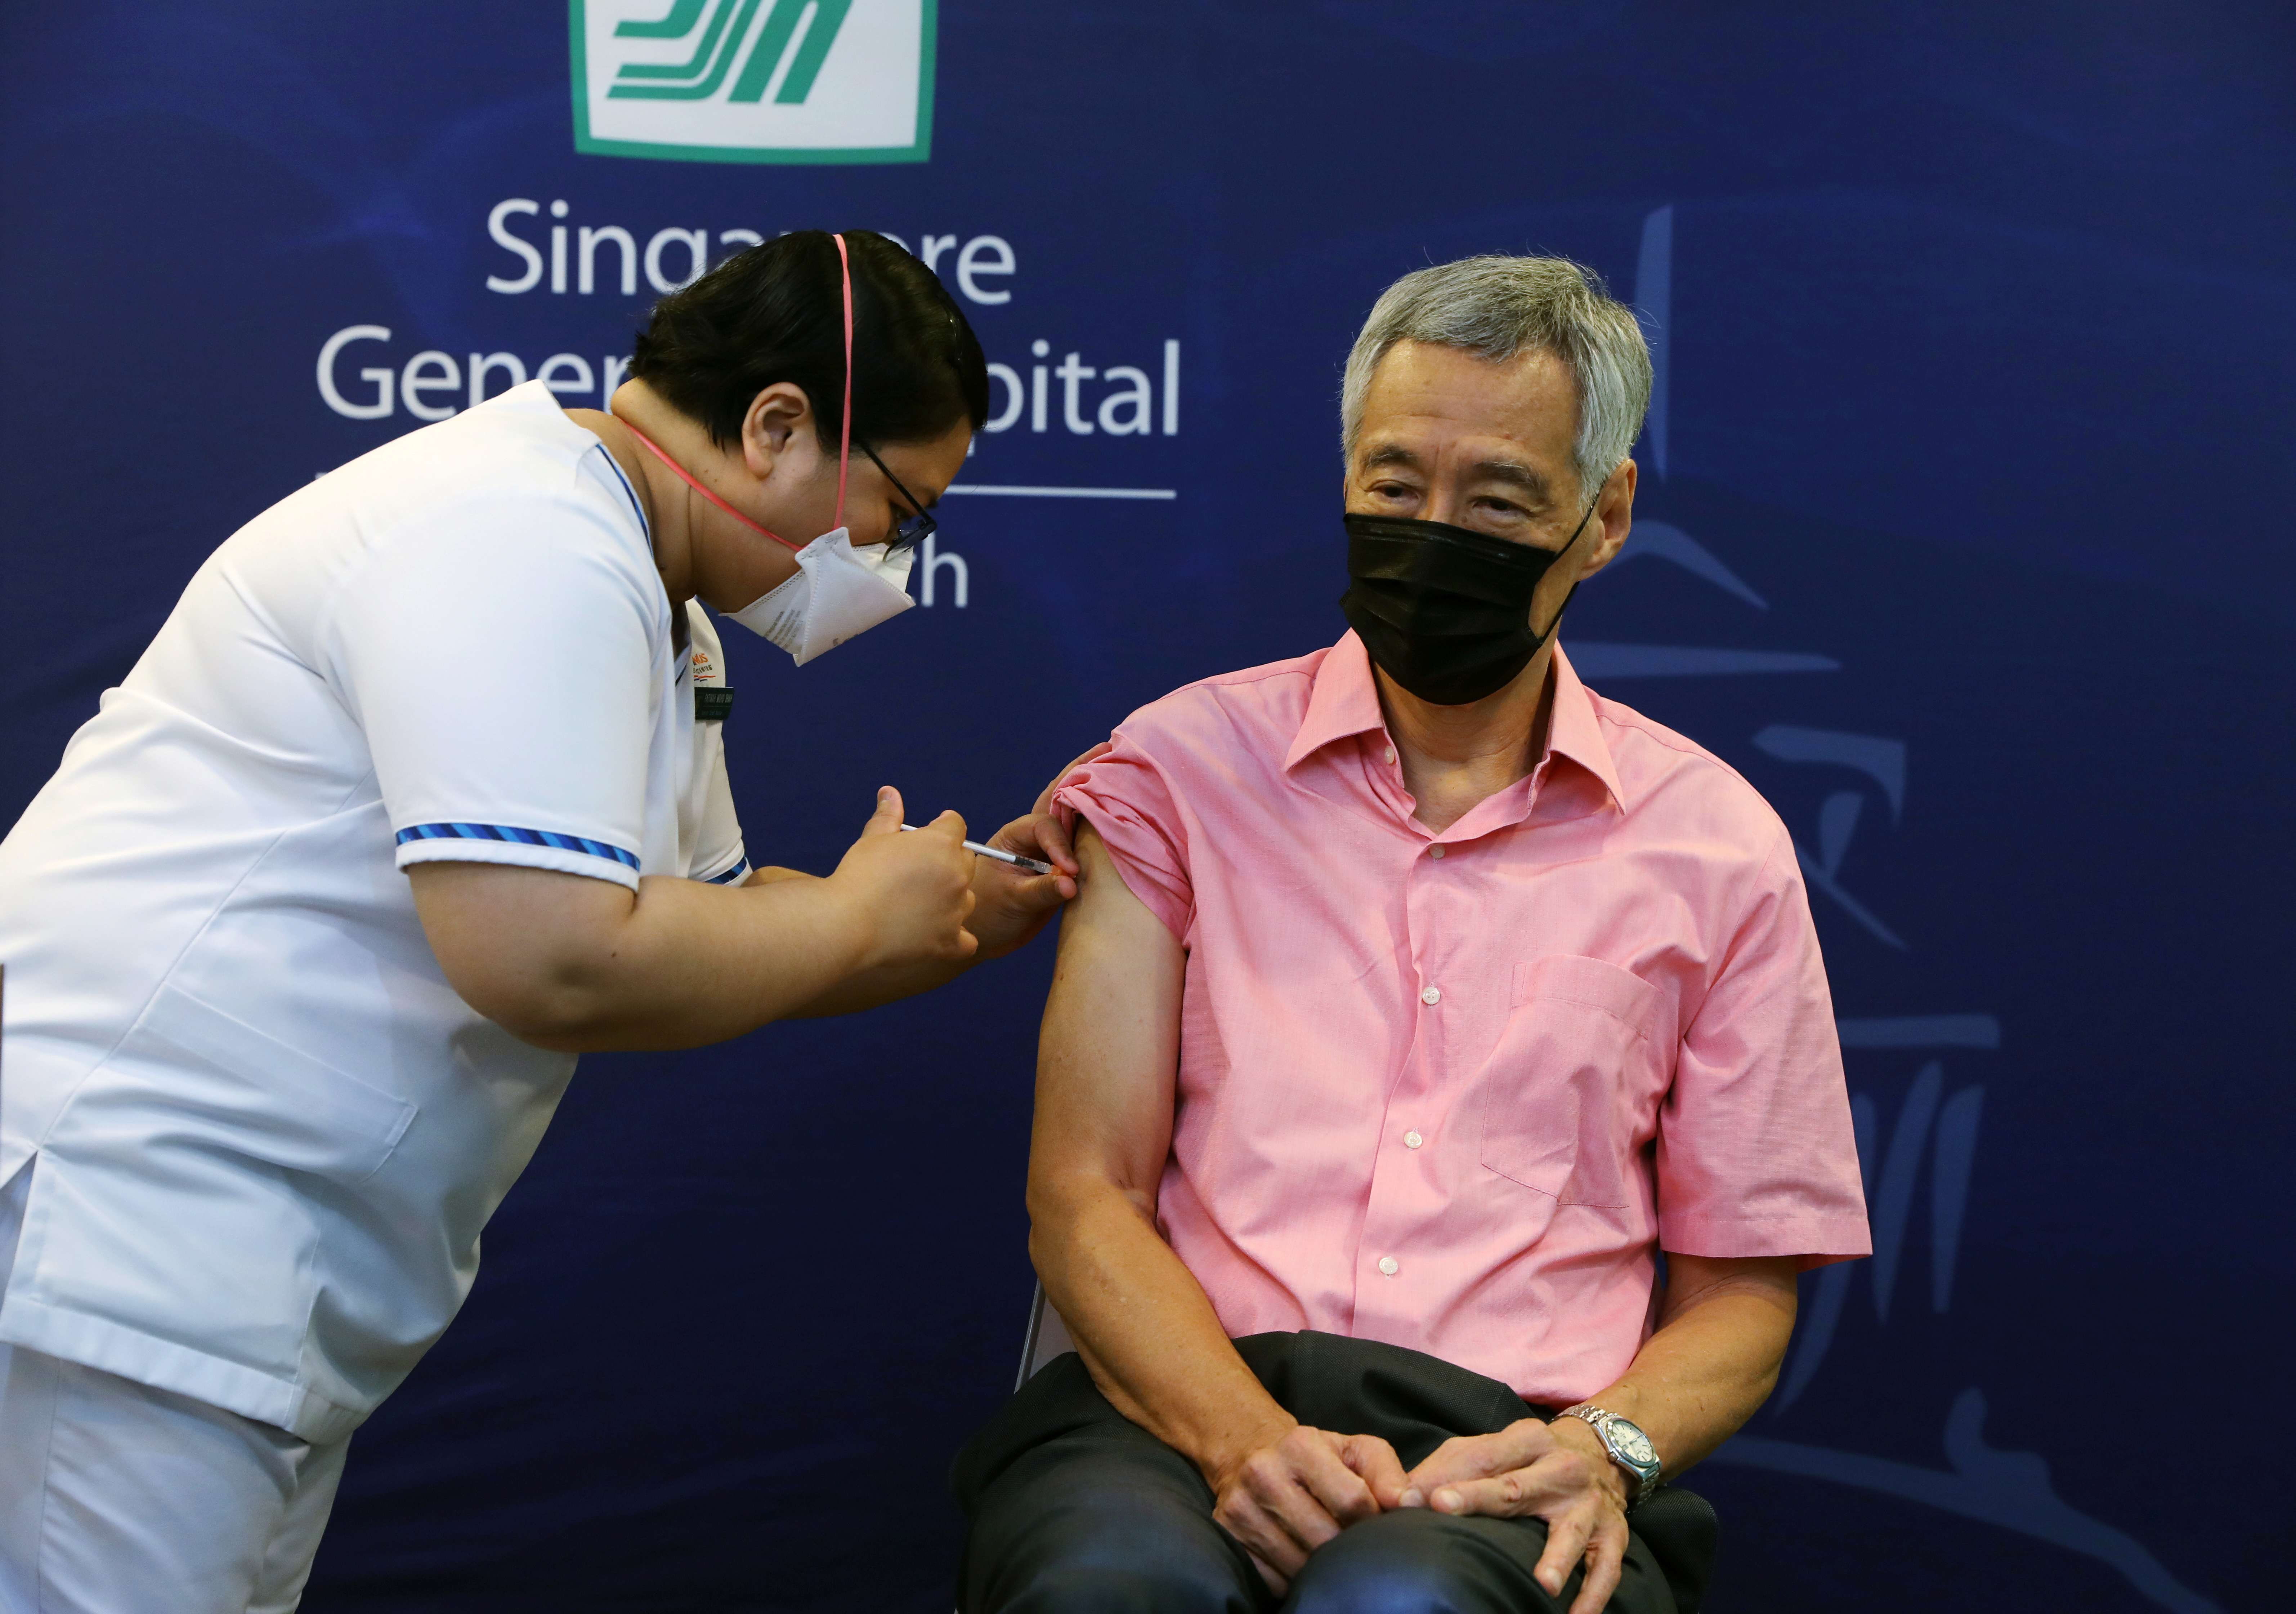 Singapore's Prime Minister Lee Hsien Loong receives a booster shot of coronavirus disease (COVID-19) vaccine at the Singapore General Hospital